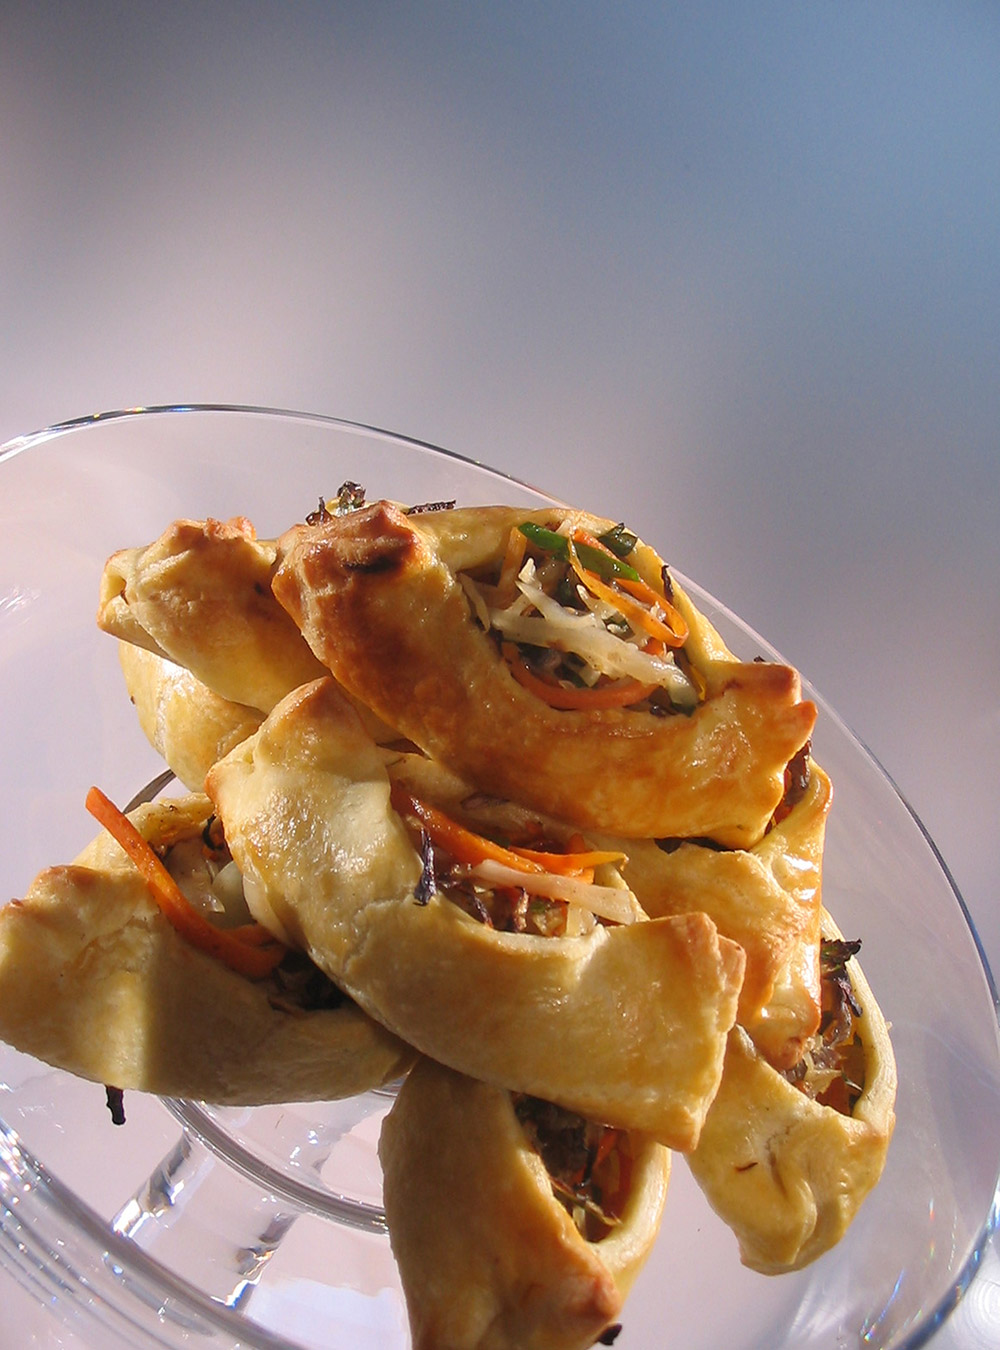 Moroccan Lamb and Vegetable Pastries